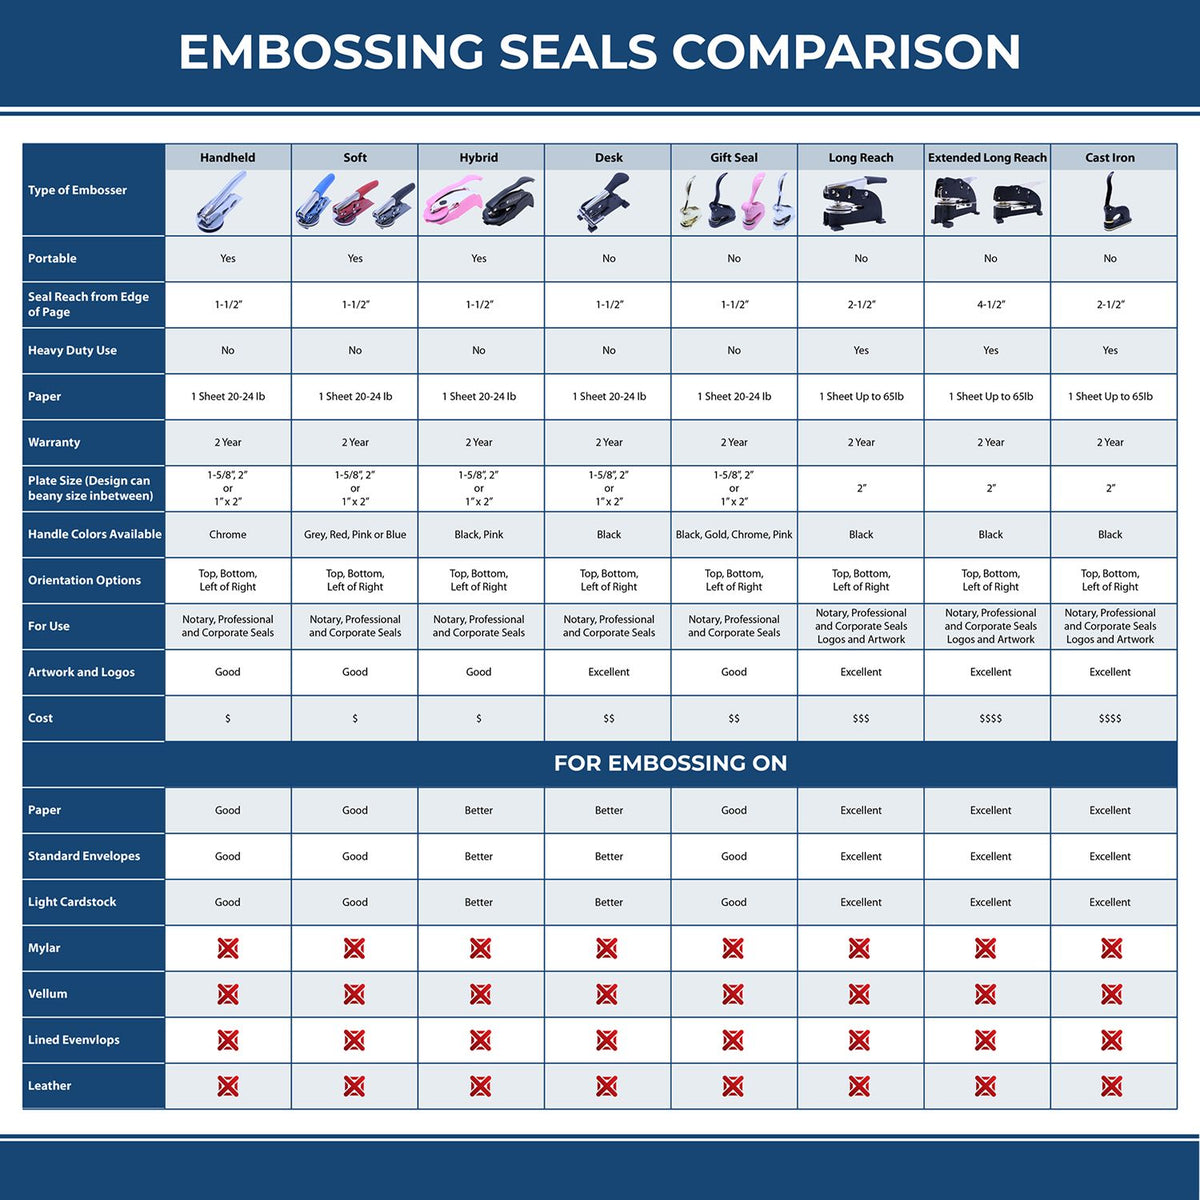 A comparison chart for the different types of mount models available for the Hybrid New York Geologist Seal